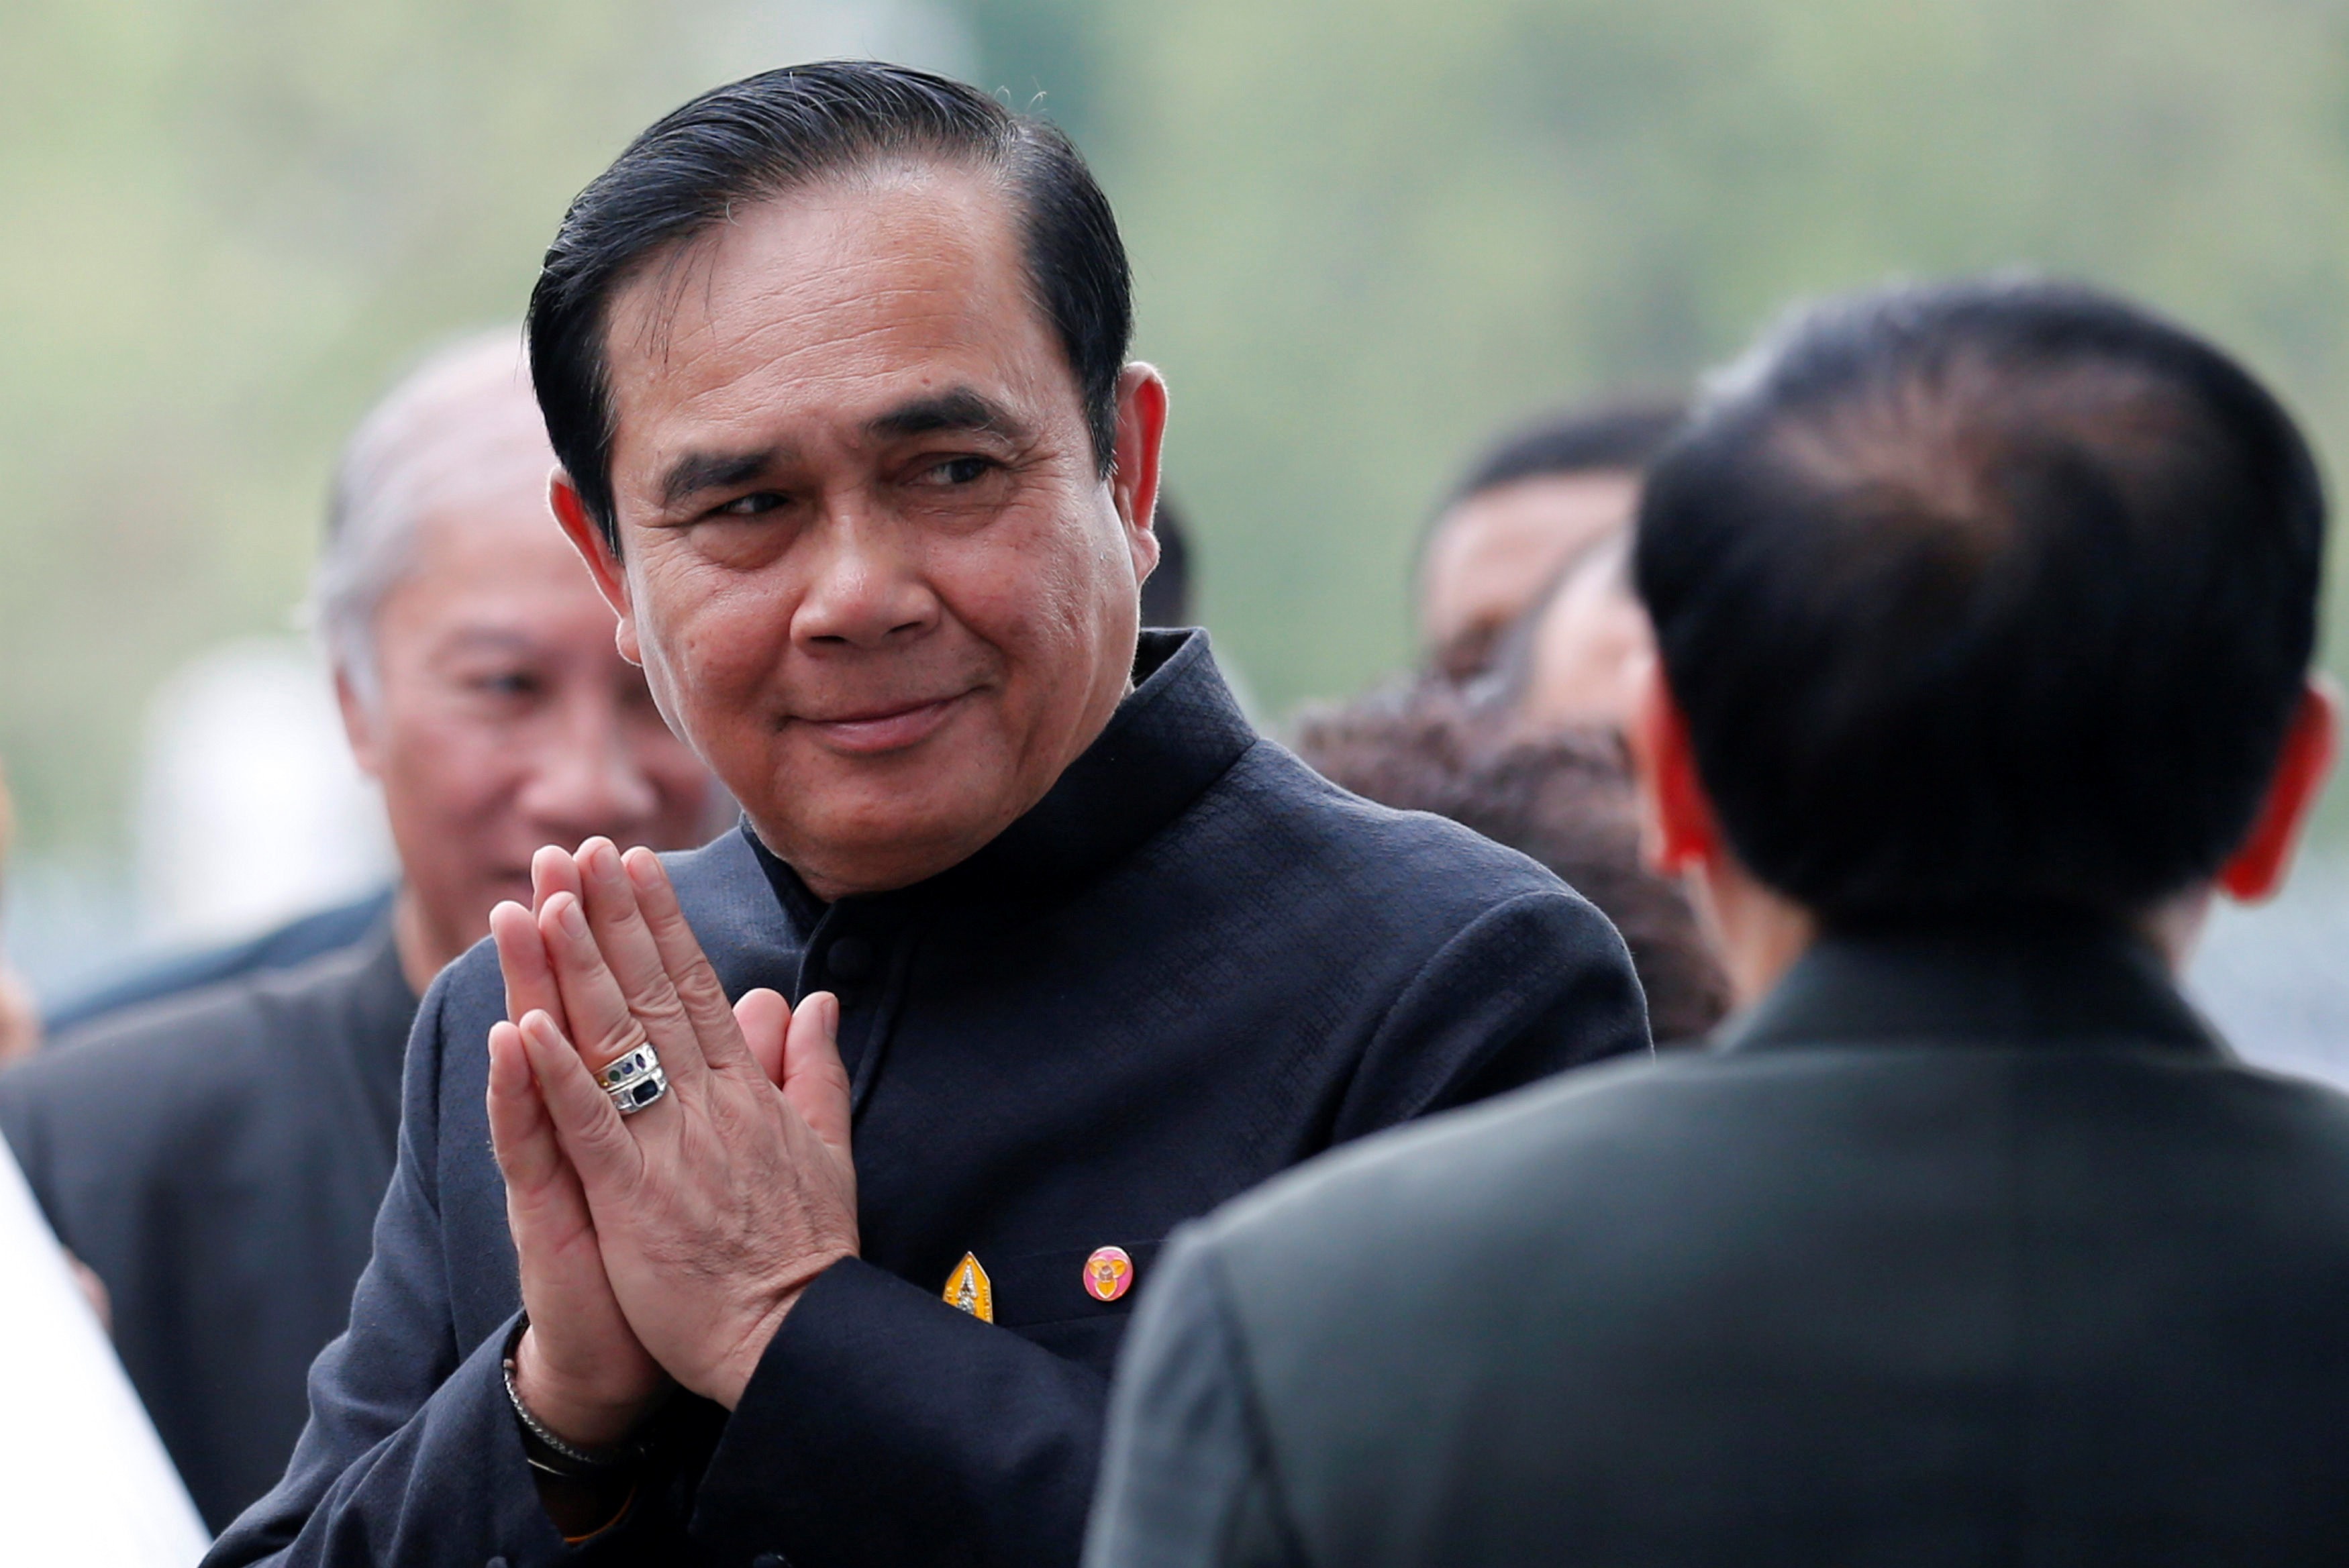 Thailand's Prime Minister Prayuth Chan-ocha arrives for a weekly cabinet meeting in Bangkok in April 2017. Photo: Reuters